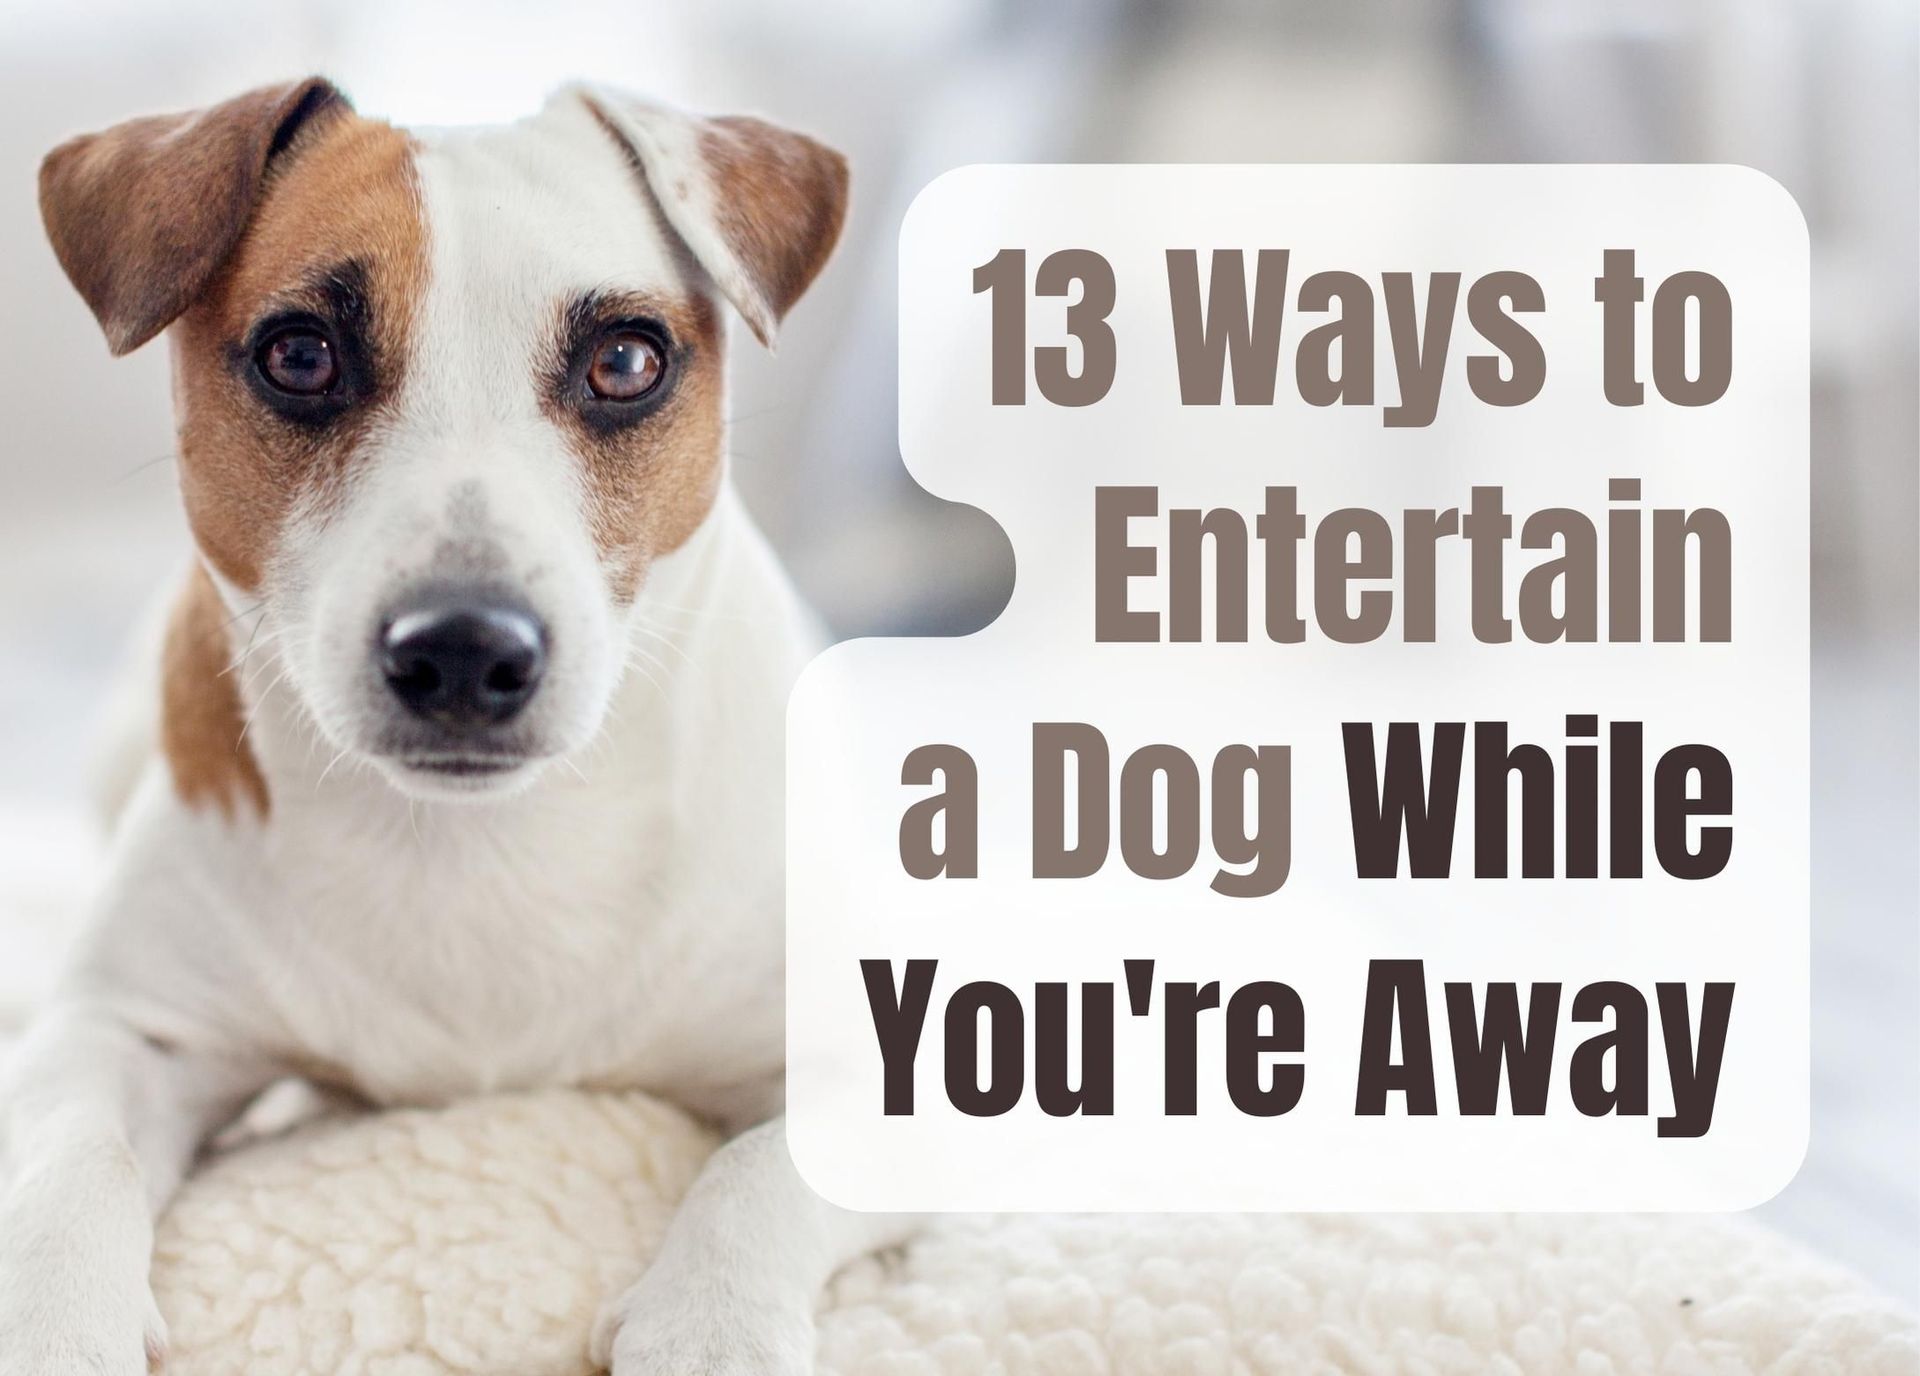 https://content.thepetsandlove.com/uploads/xlarge_13_ways_to_keep_your_dog_entertained_while_you_re_away_d9dca88dd4.jpg